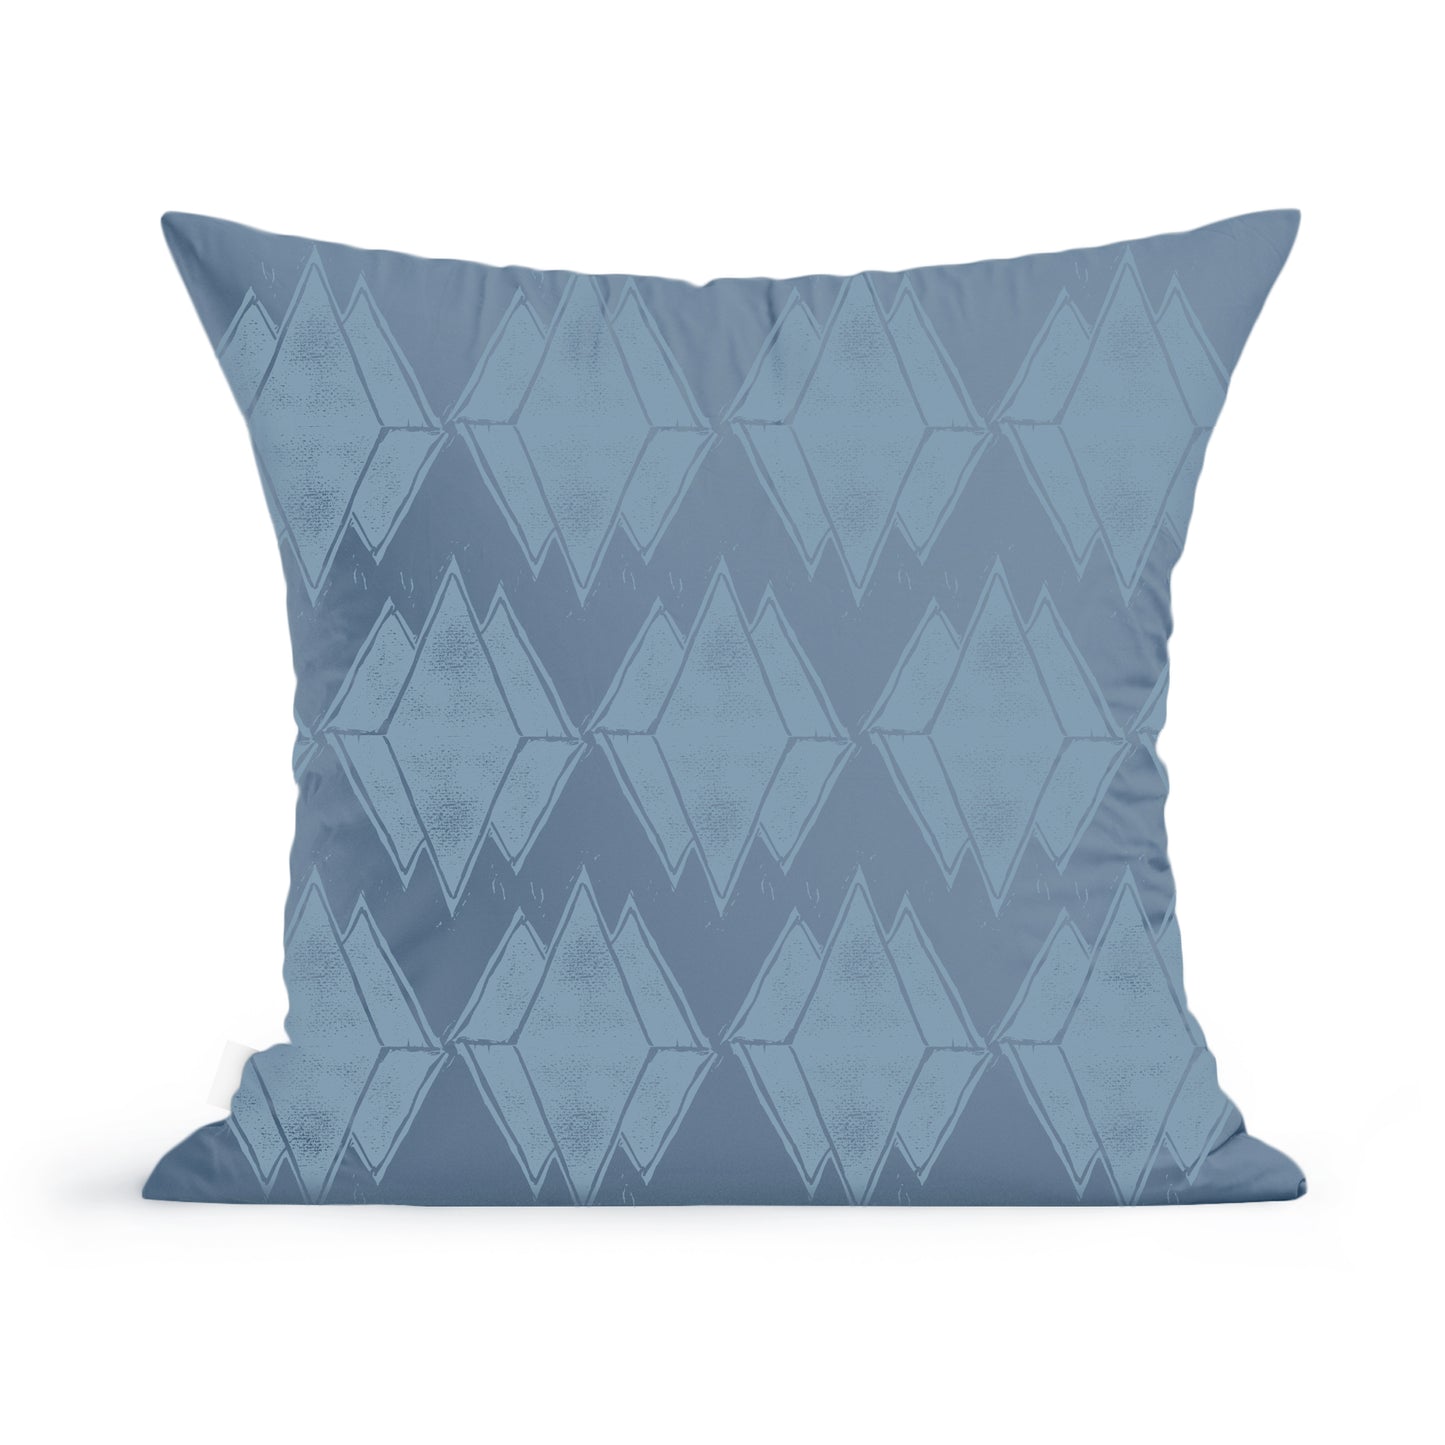 A Maine Mountain Reflections Pillow by Rustic County, featuring a pattern of subtle, geometric white diamonds repeated across its surface. The pillow appears soft with a smooth texture, perfectly complementing modern home decor.